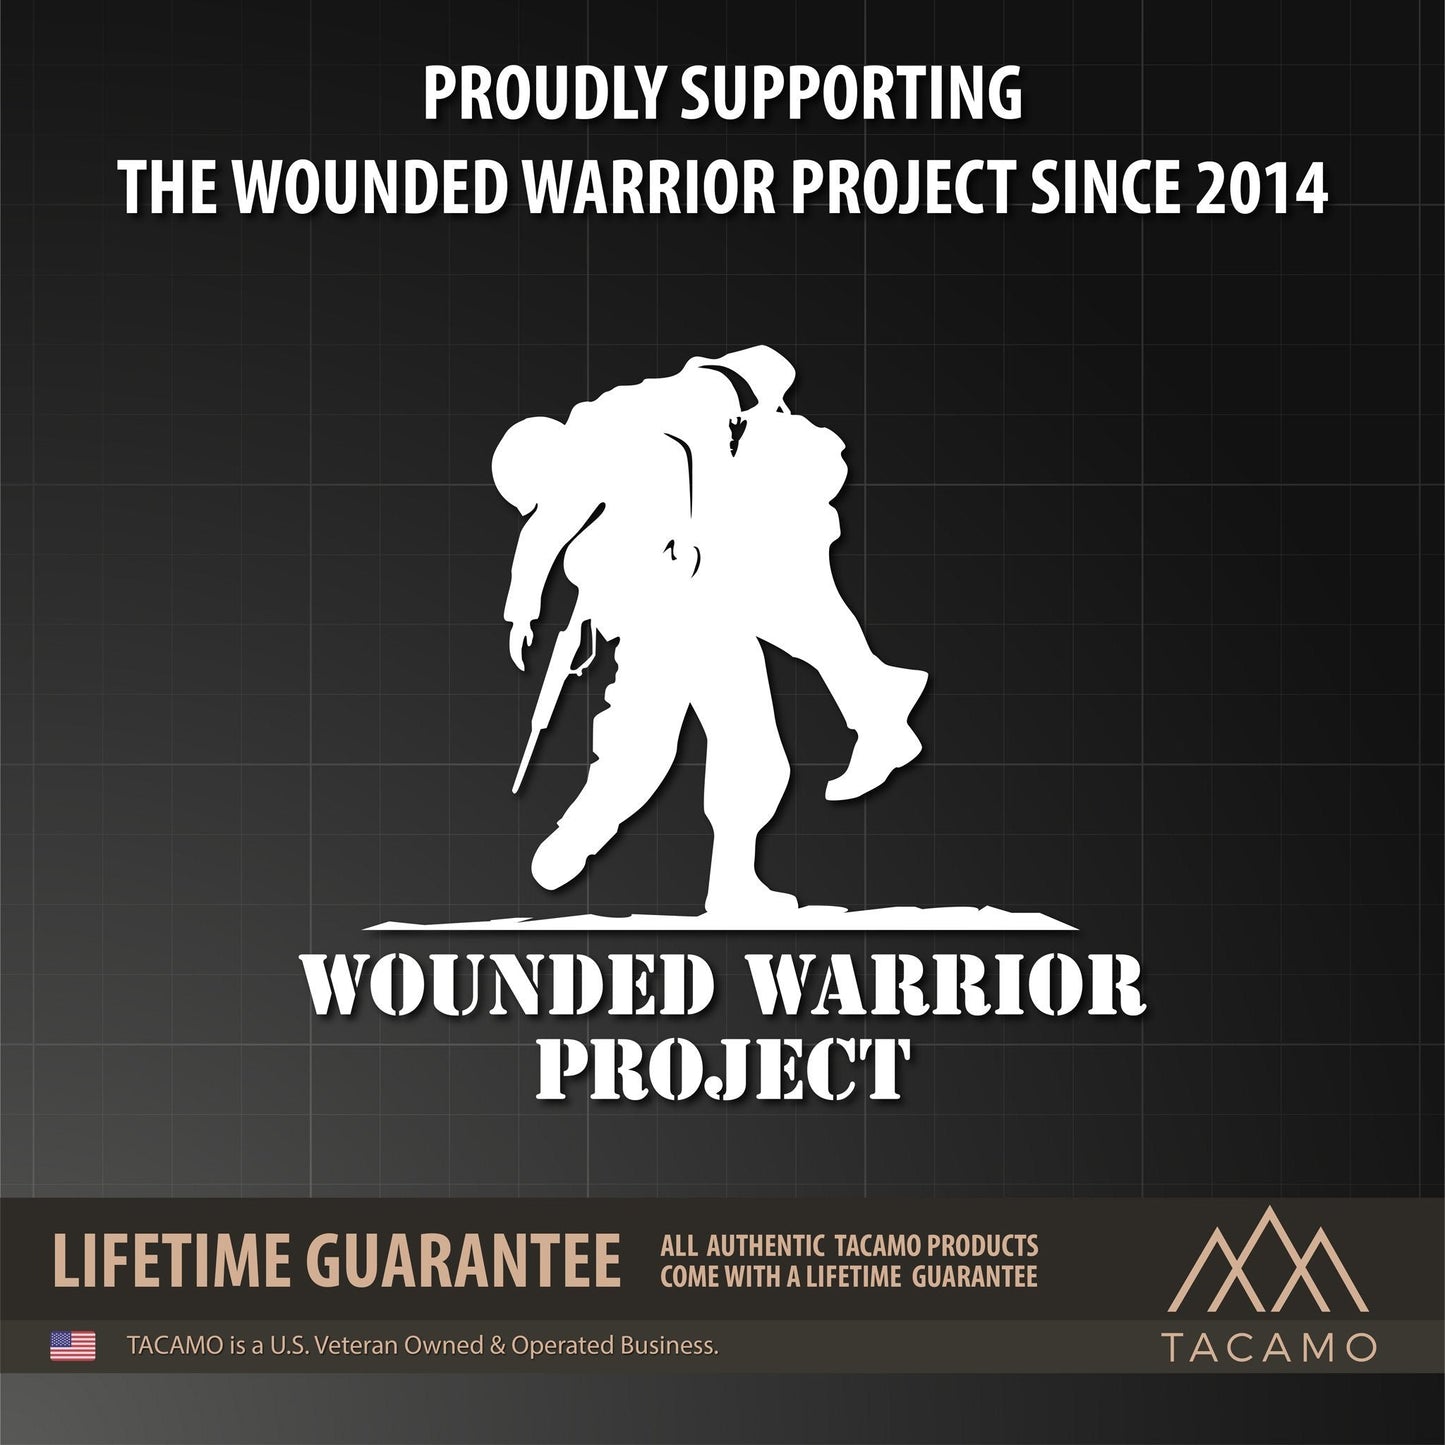 Wounded Warrior Project display graphic explaining the TACAMO products support them and have a lifetime guarantee